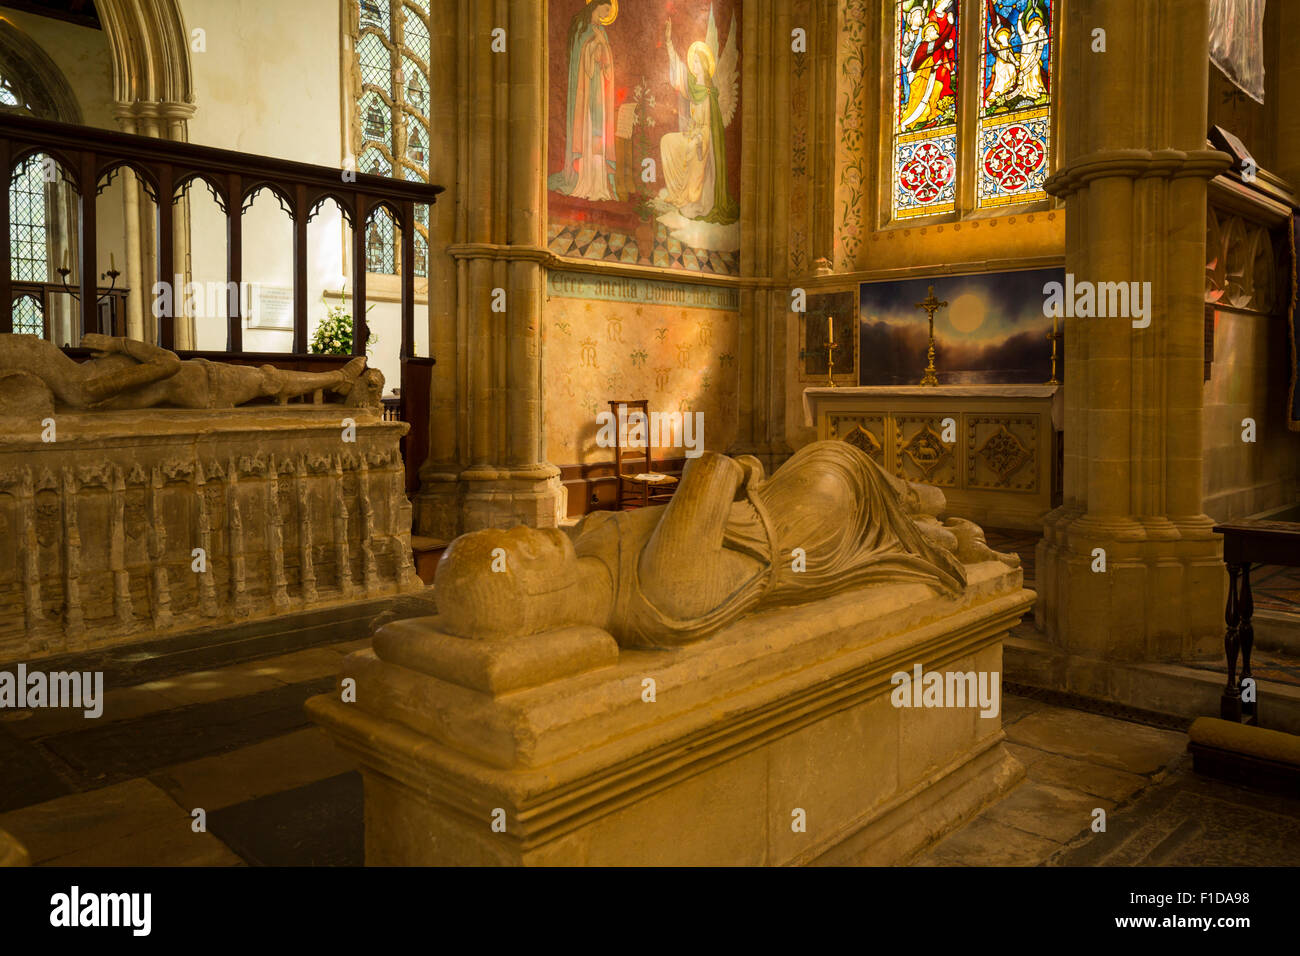 Inside the  Abbey at Dorchester in South Oxfordshirebritish, tourism, travel Stock Photo